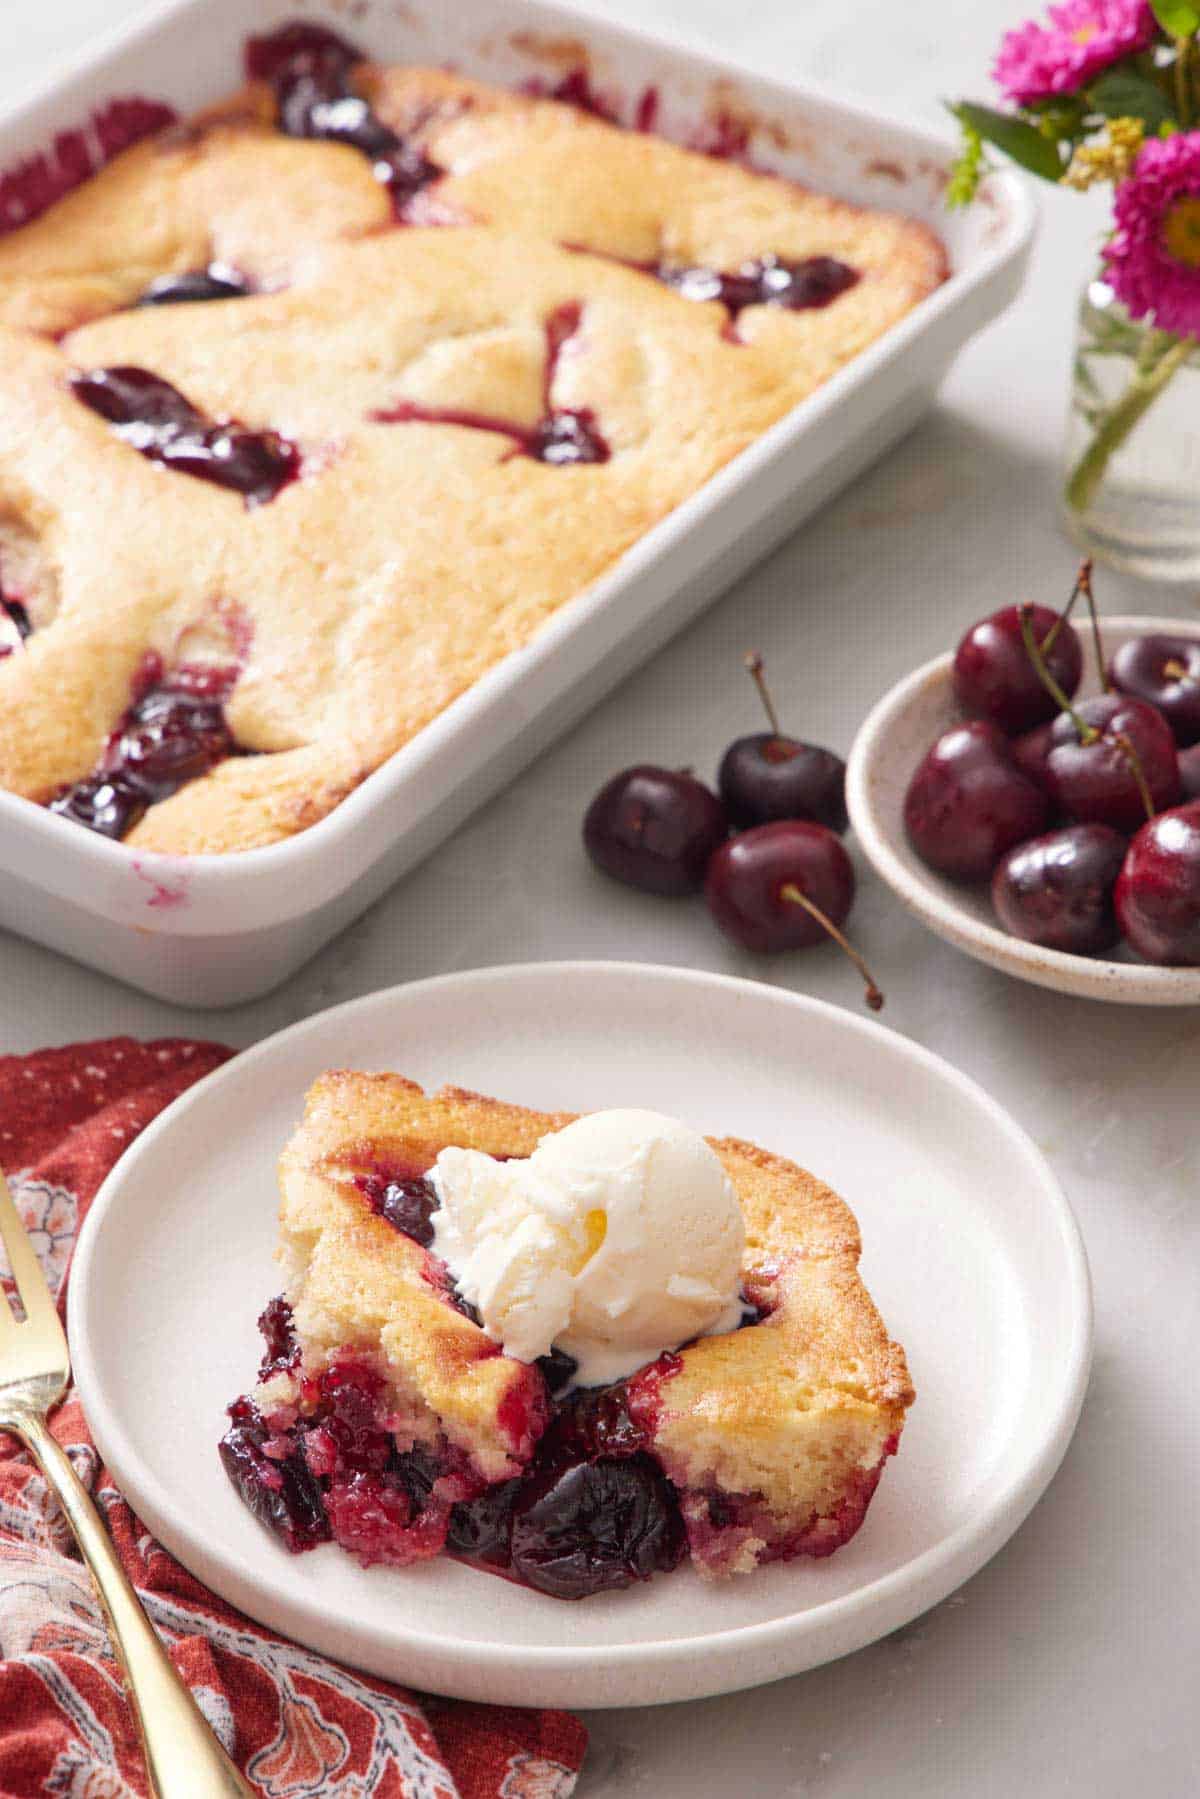 A plate with a serving of cherry cobbler with the rest of the cobbler in the background with a bowl of cherries.